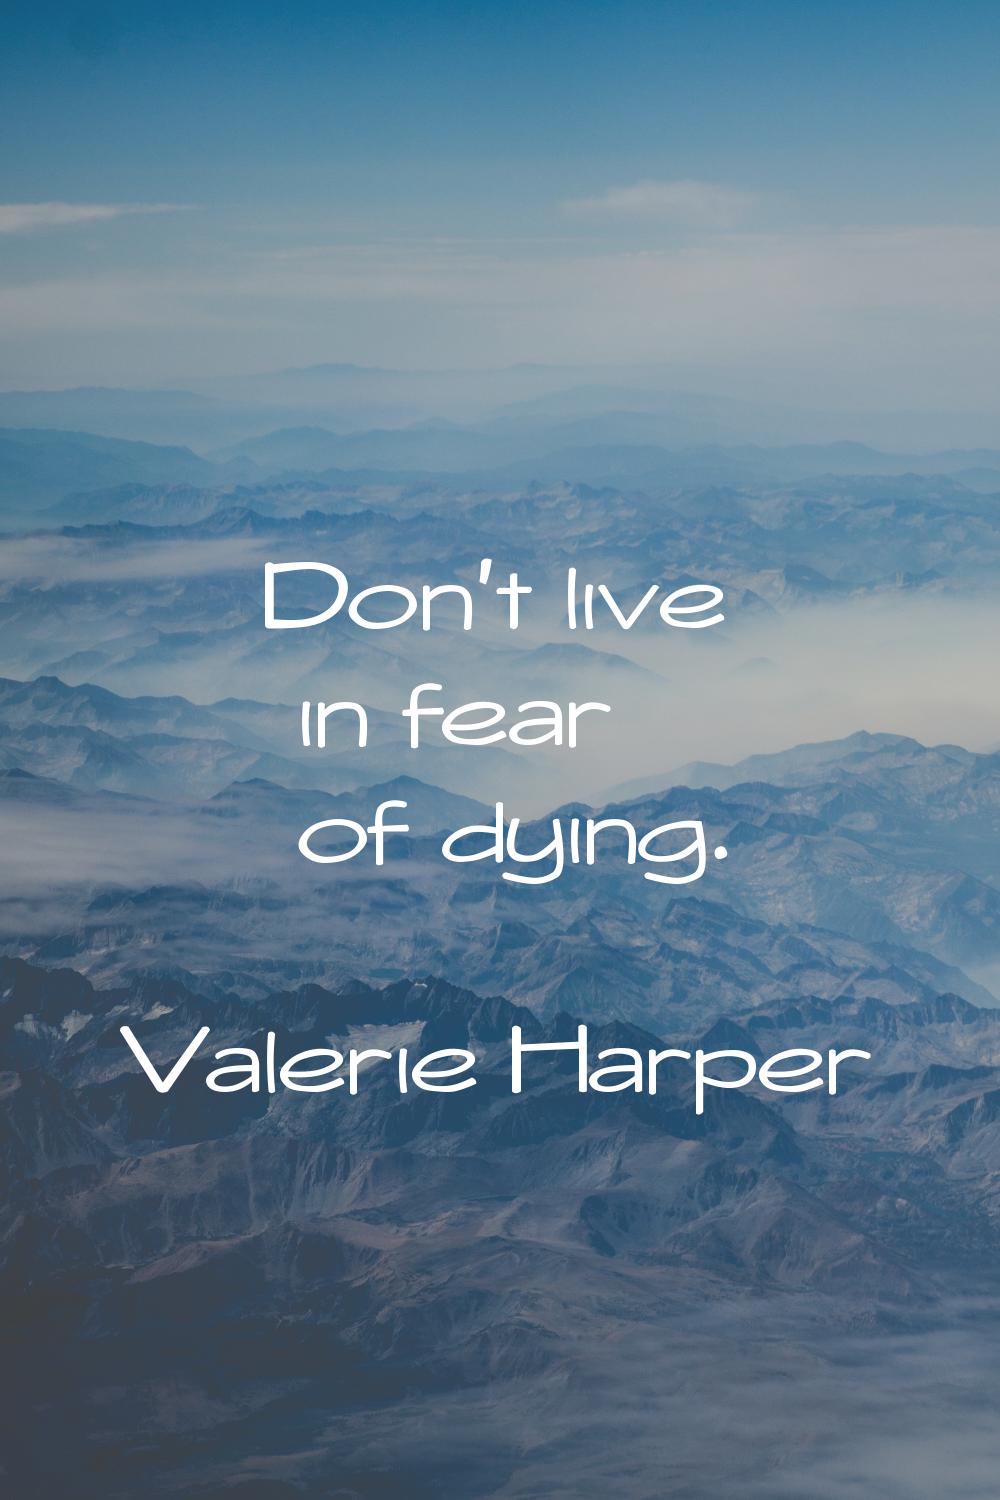 Don't live in fear of dying.